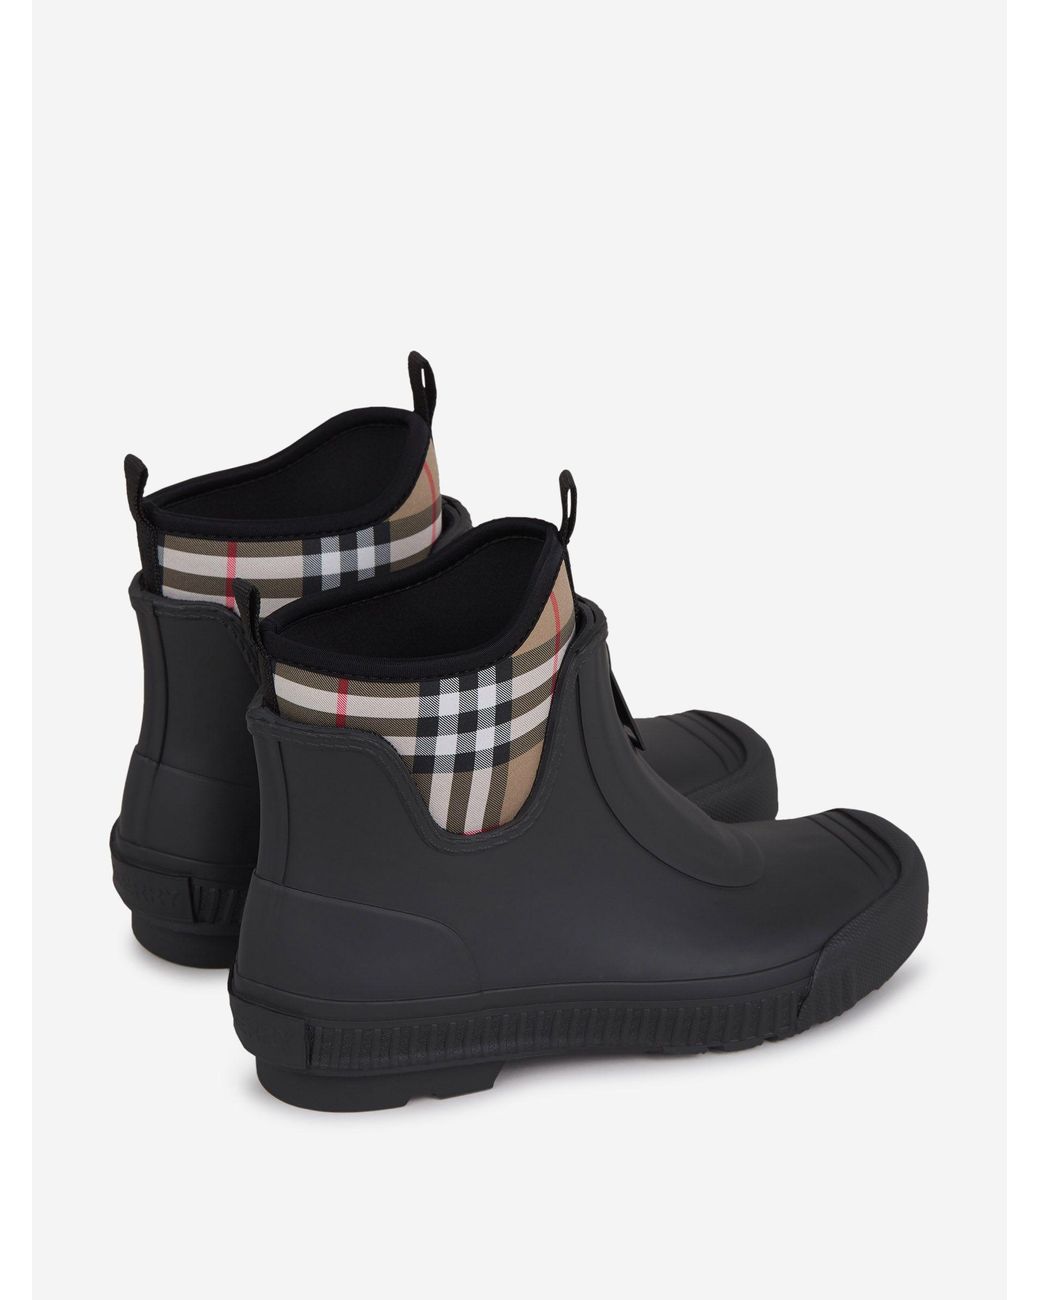 Burberry Checkered Rain Boots in Black | Lyst